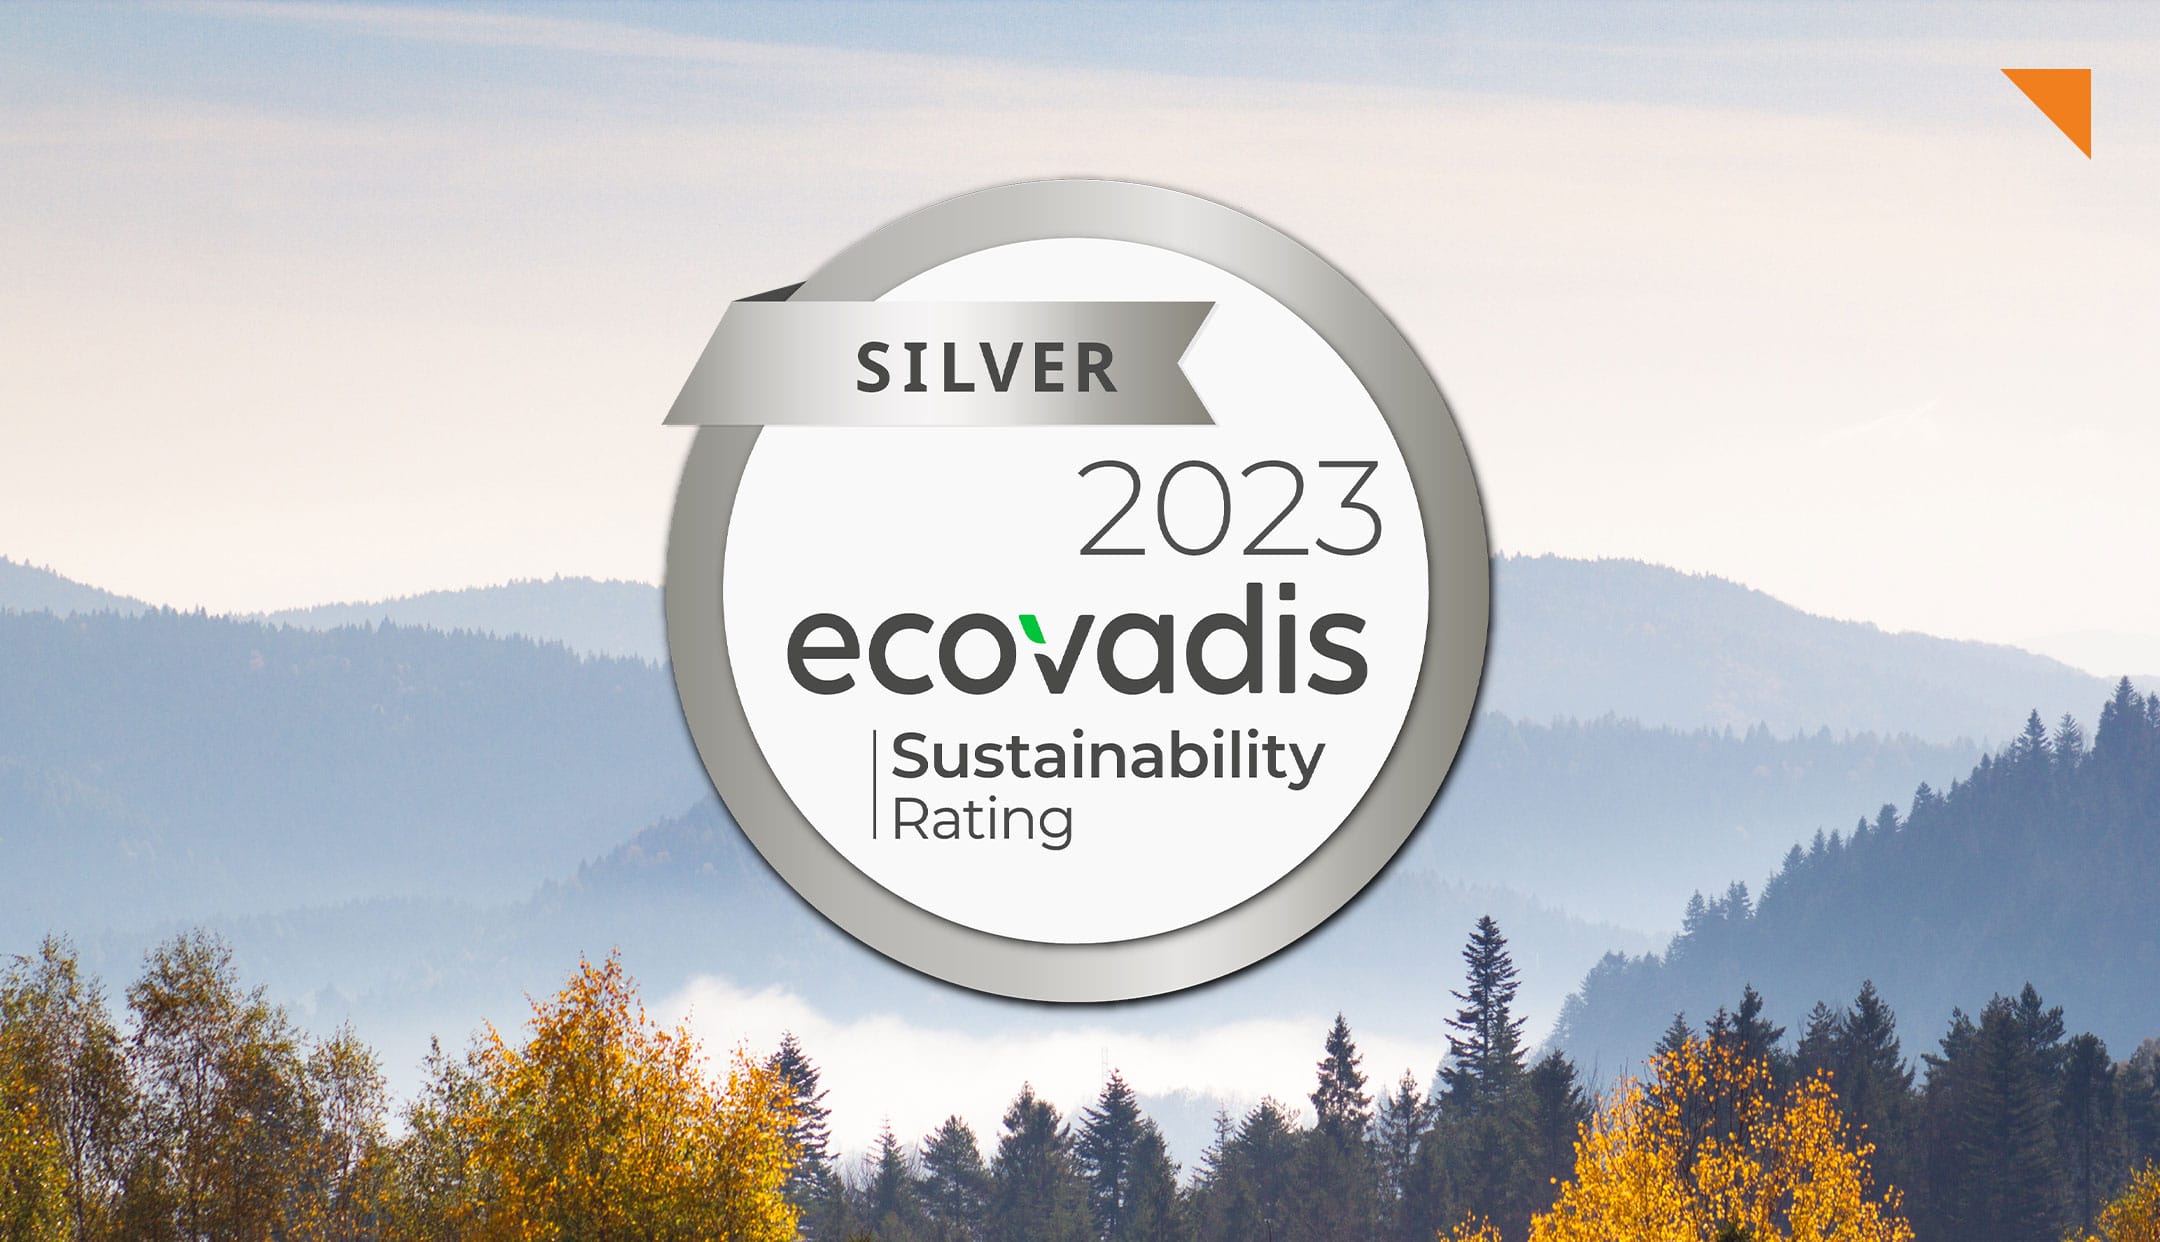 Corporate Social Responsibility: usd 2023 Awarded EcoVadis Silver Medal Again